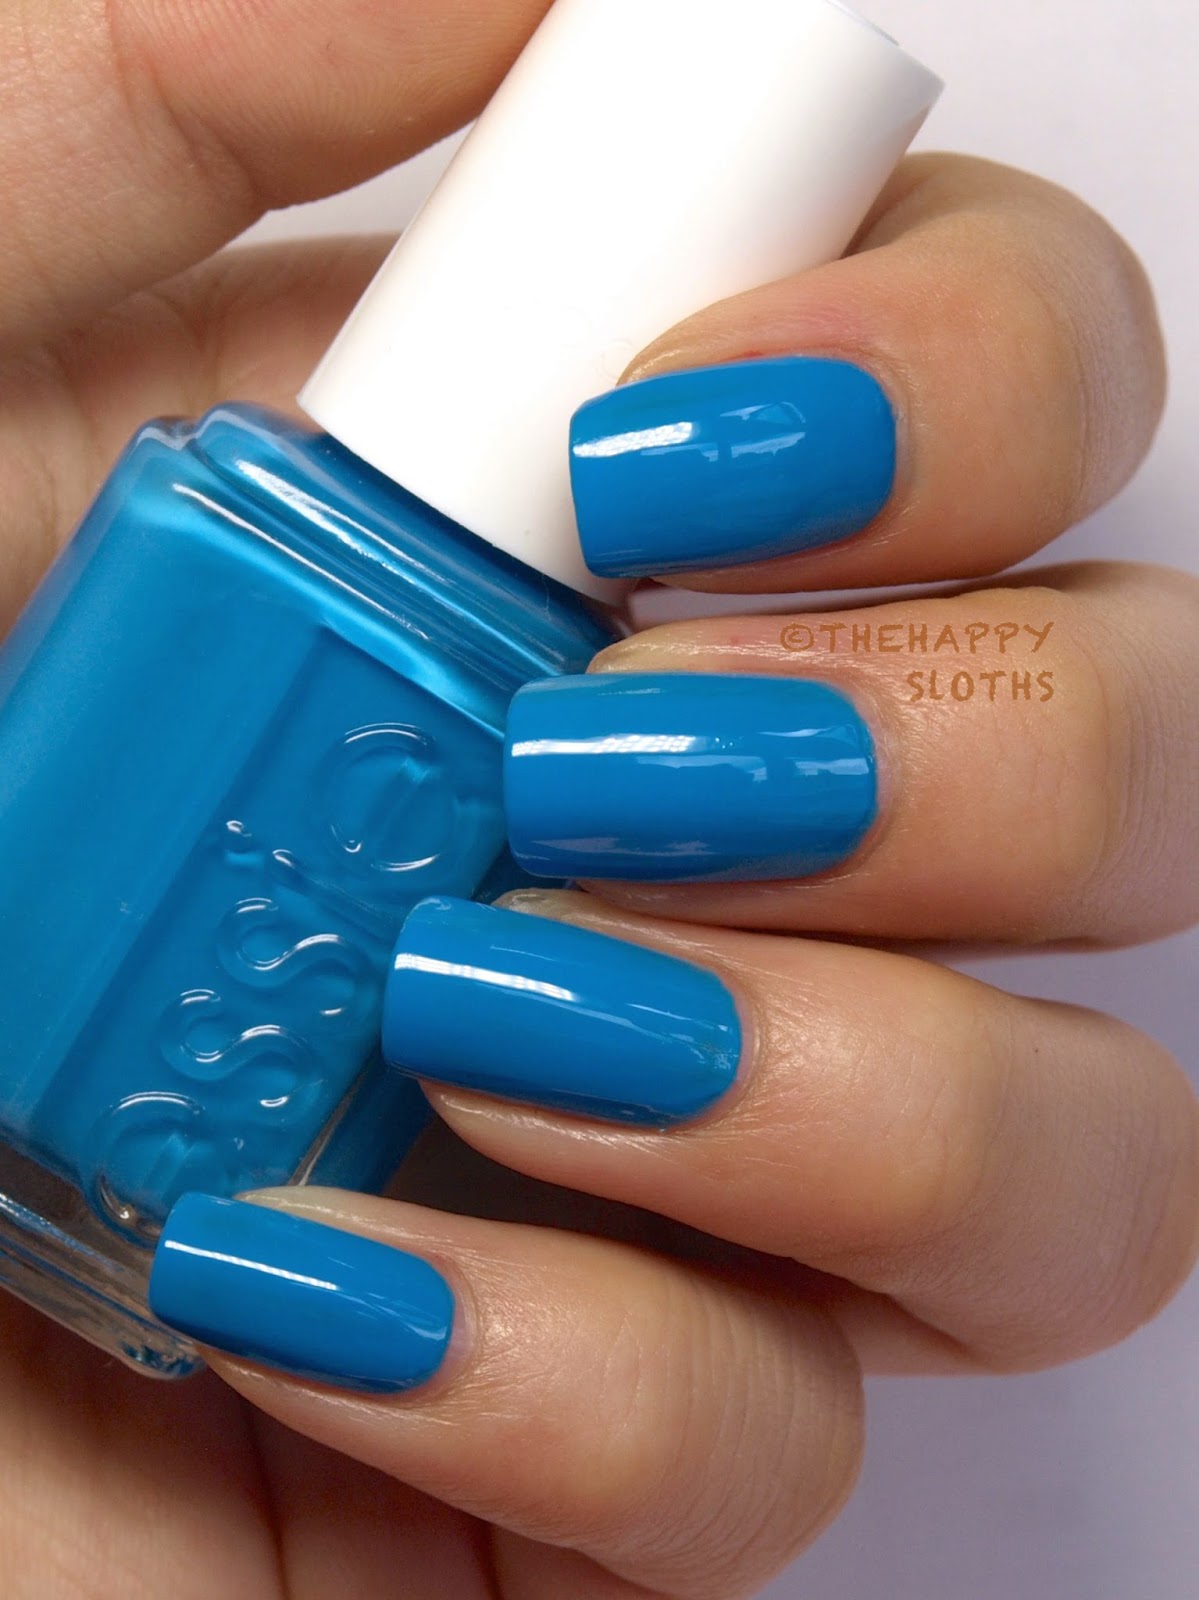 Essie Summer 2014 Nail Polish Collection: Review and Swatches